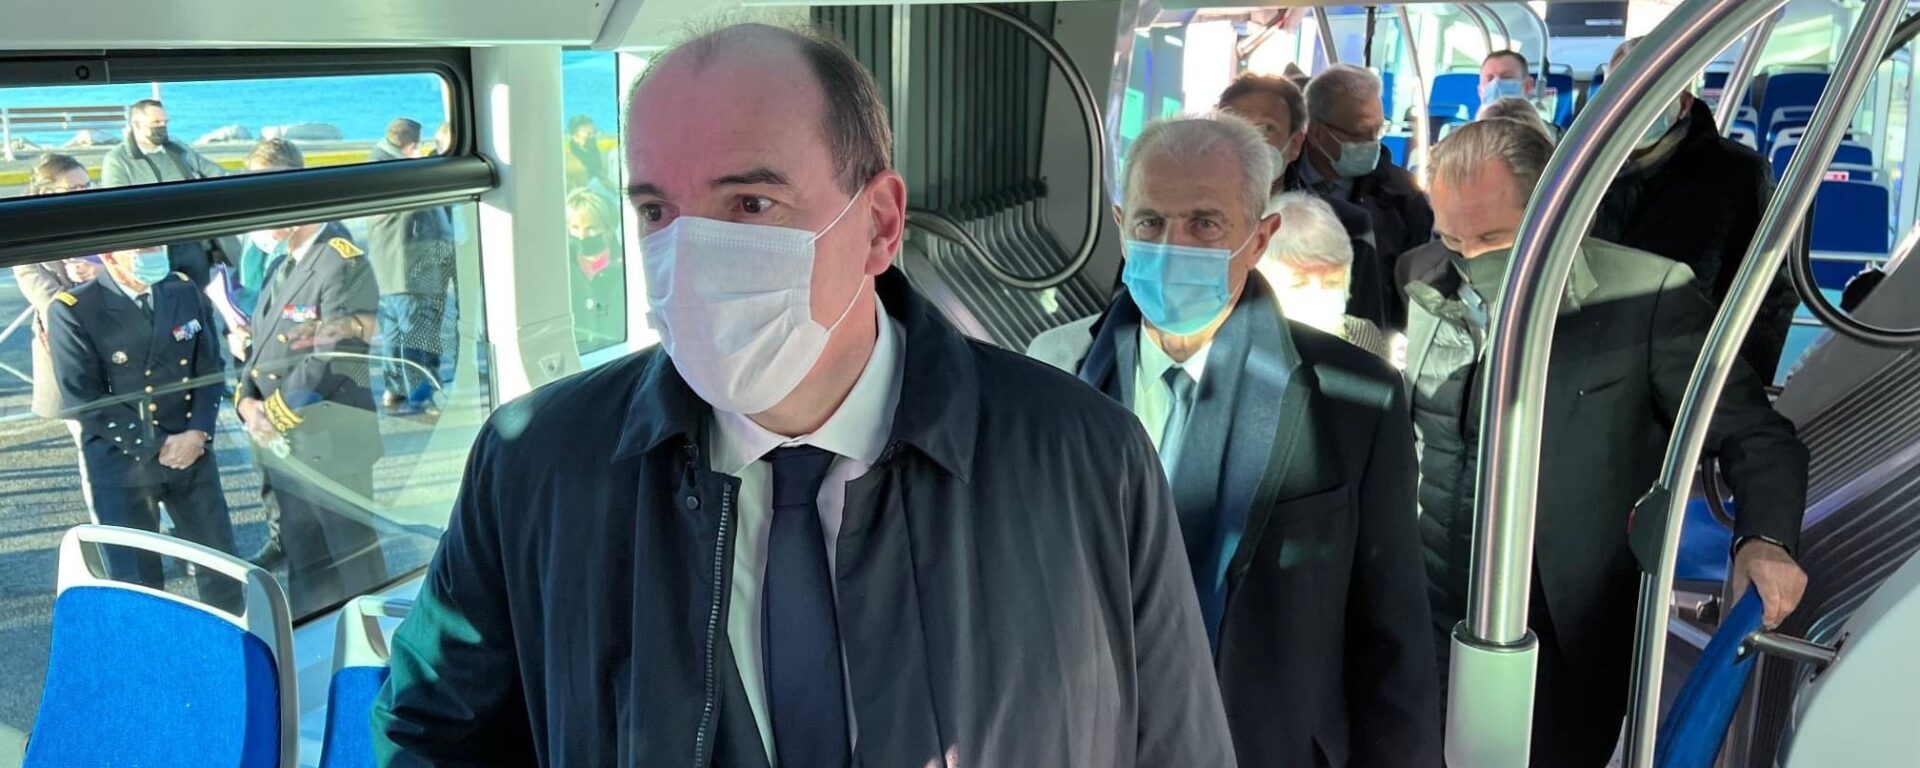 french-prime-minister-visits-transdevs-clean-energy-buses-toulon